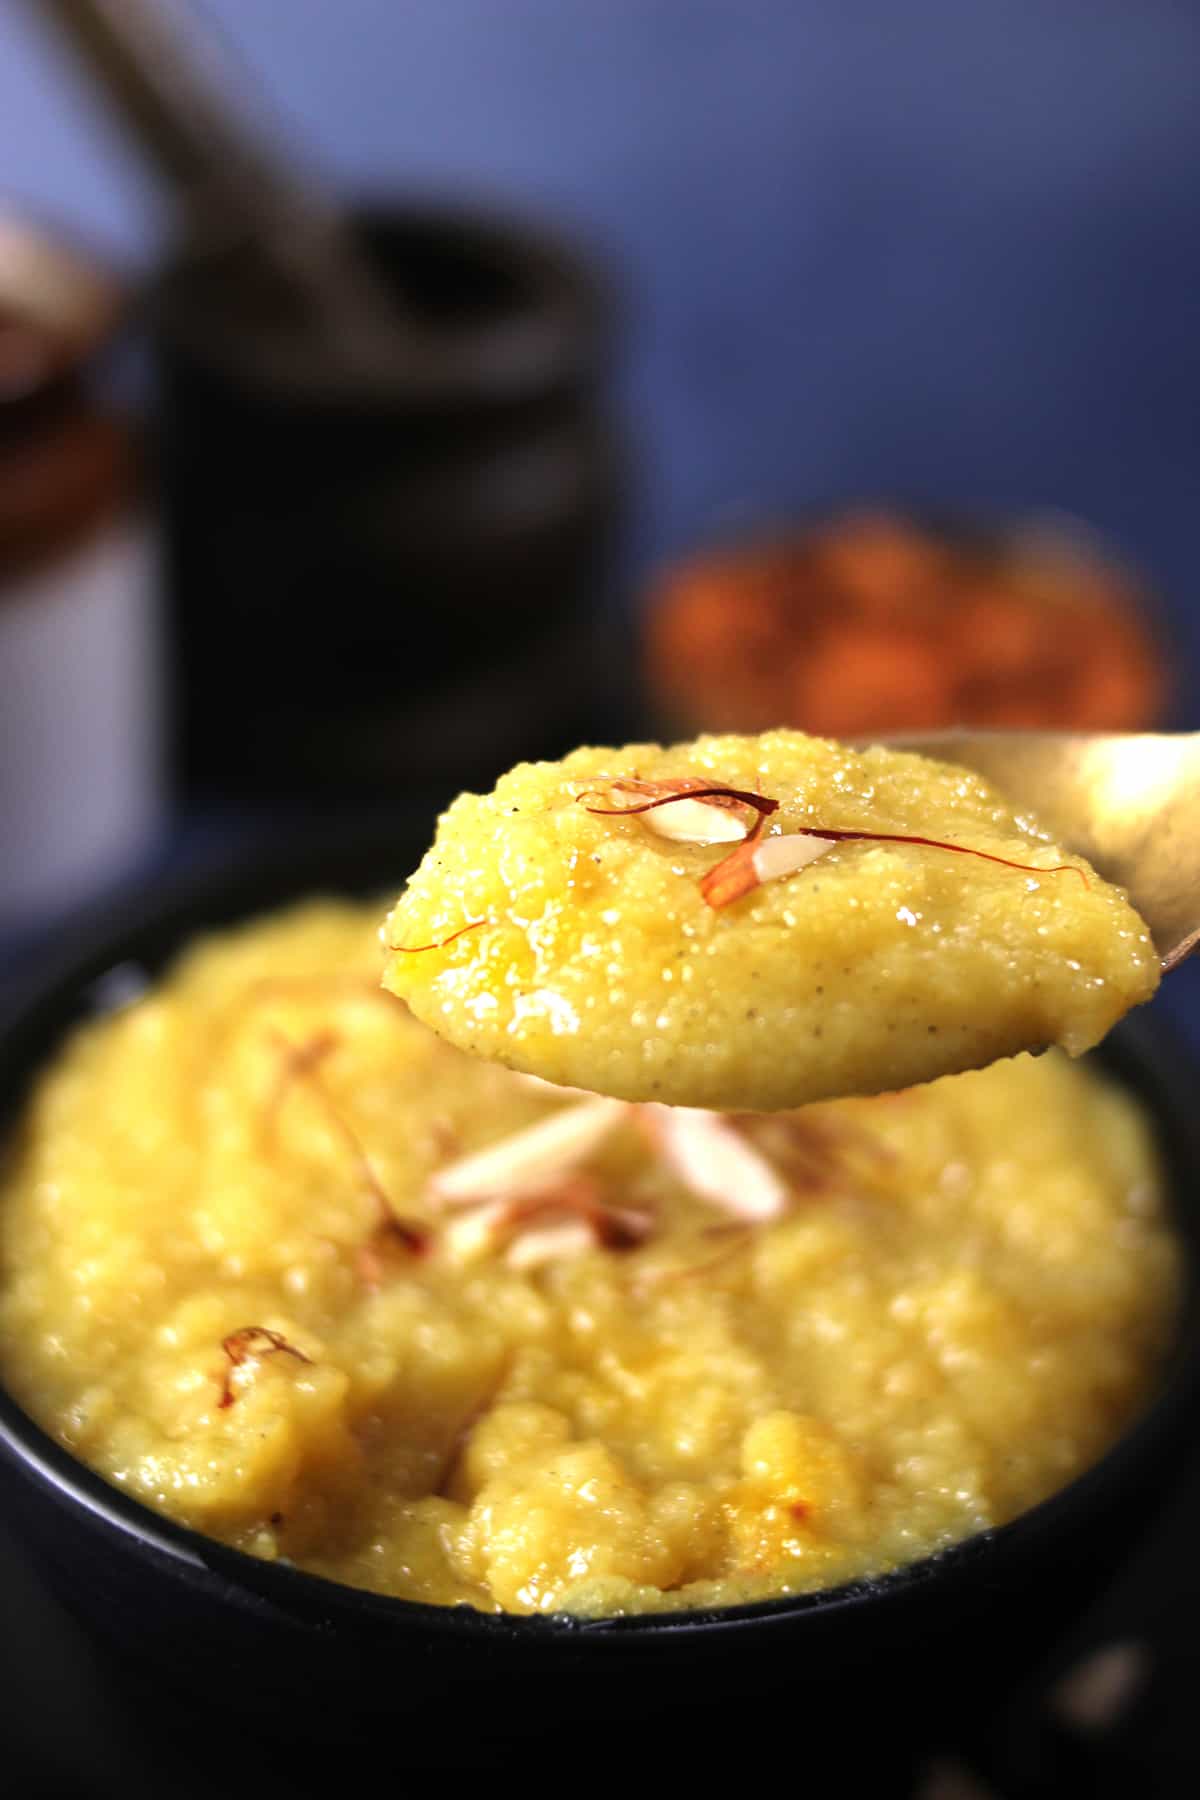 Spoonful of rich and classic authentic almond halwa sweet. (Badam halwa pudding)